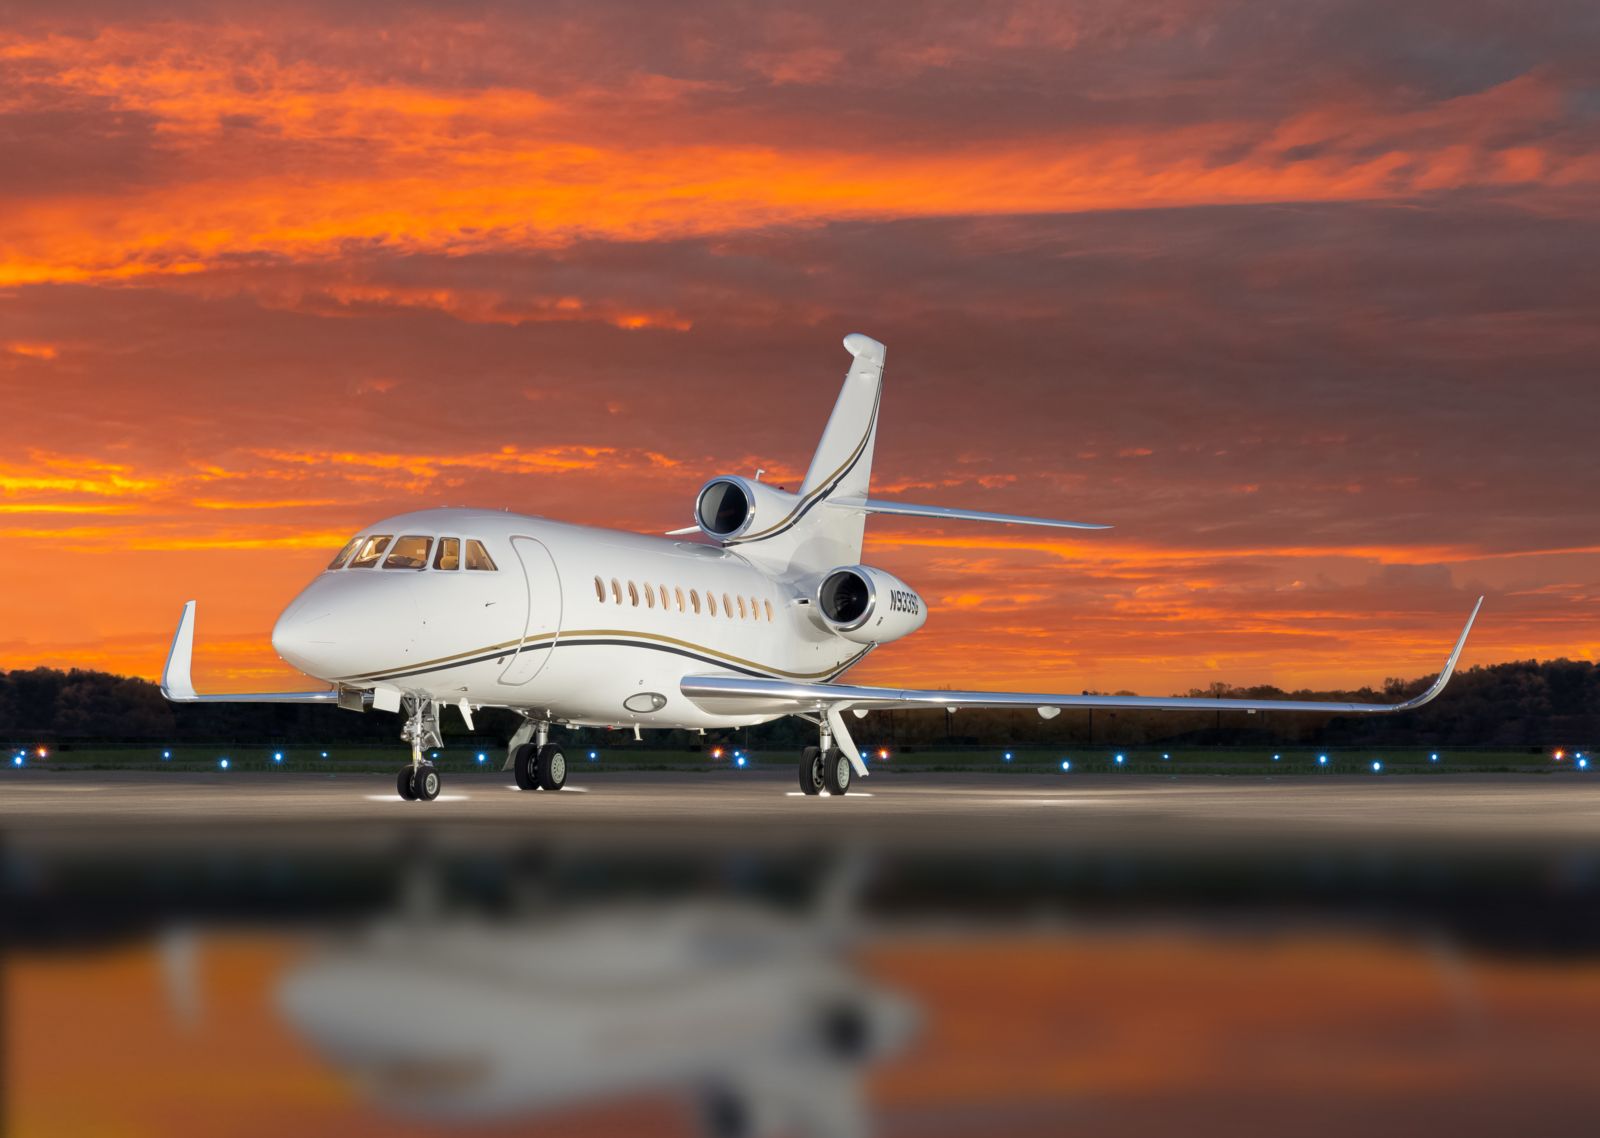 Dassault Falcon 900EX EASy gallery image /userfiles/images/F900EXy%20SN%20188/a%20last%20page.jpg